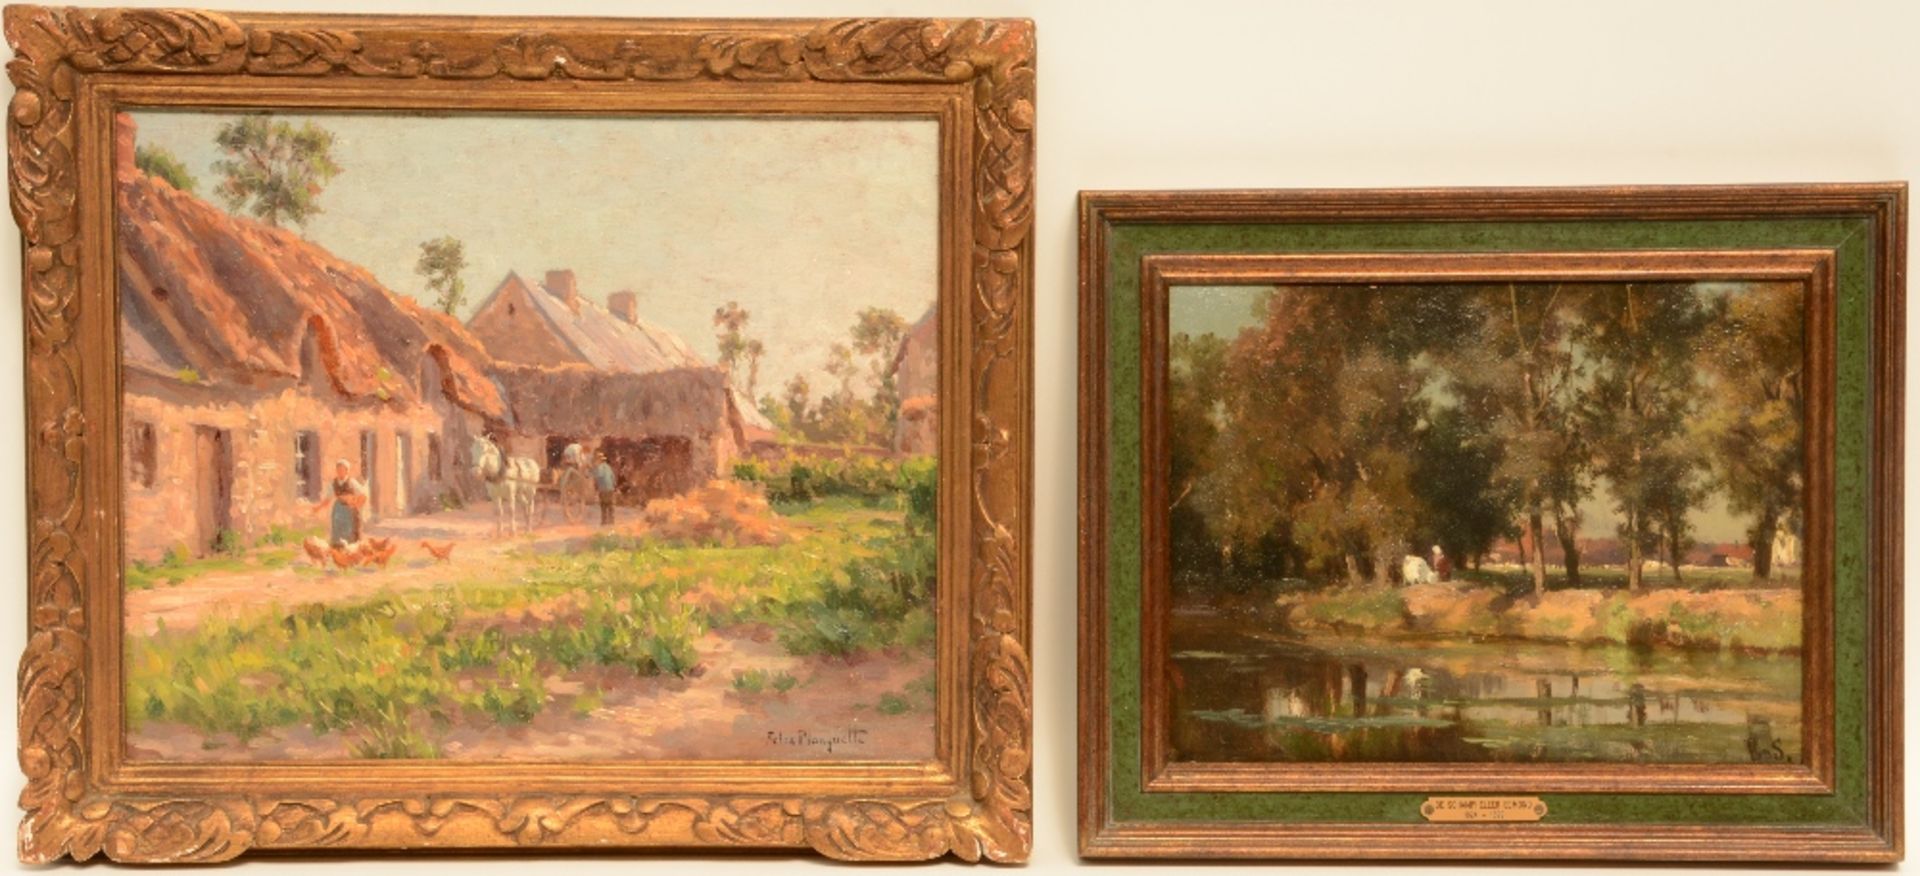 Monogrammed E.D.S. (De Schampheleer E.), rural view with a cowherd, oil on canvas on panel, signed